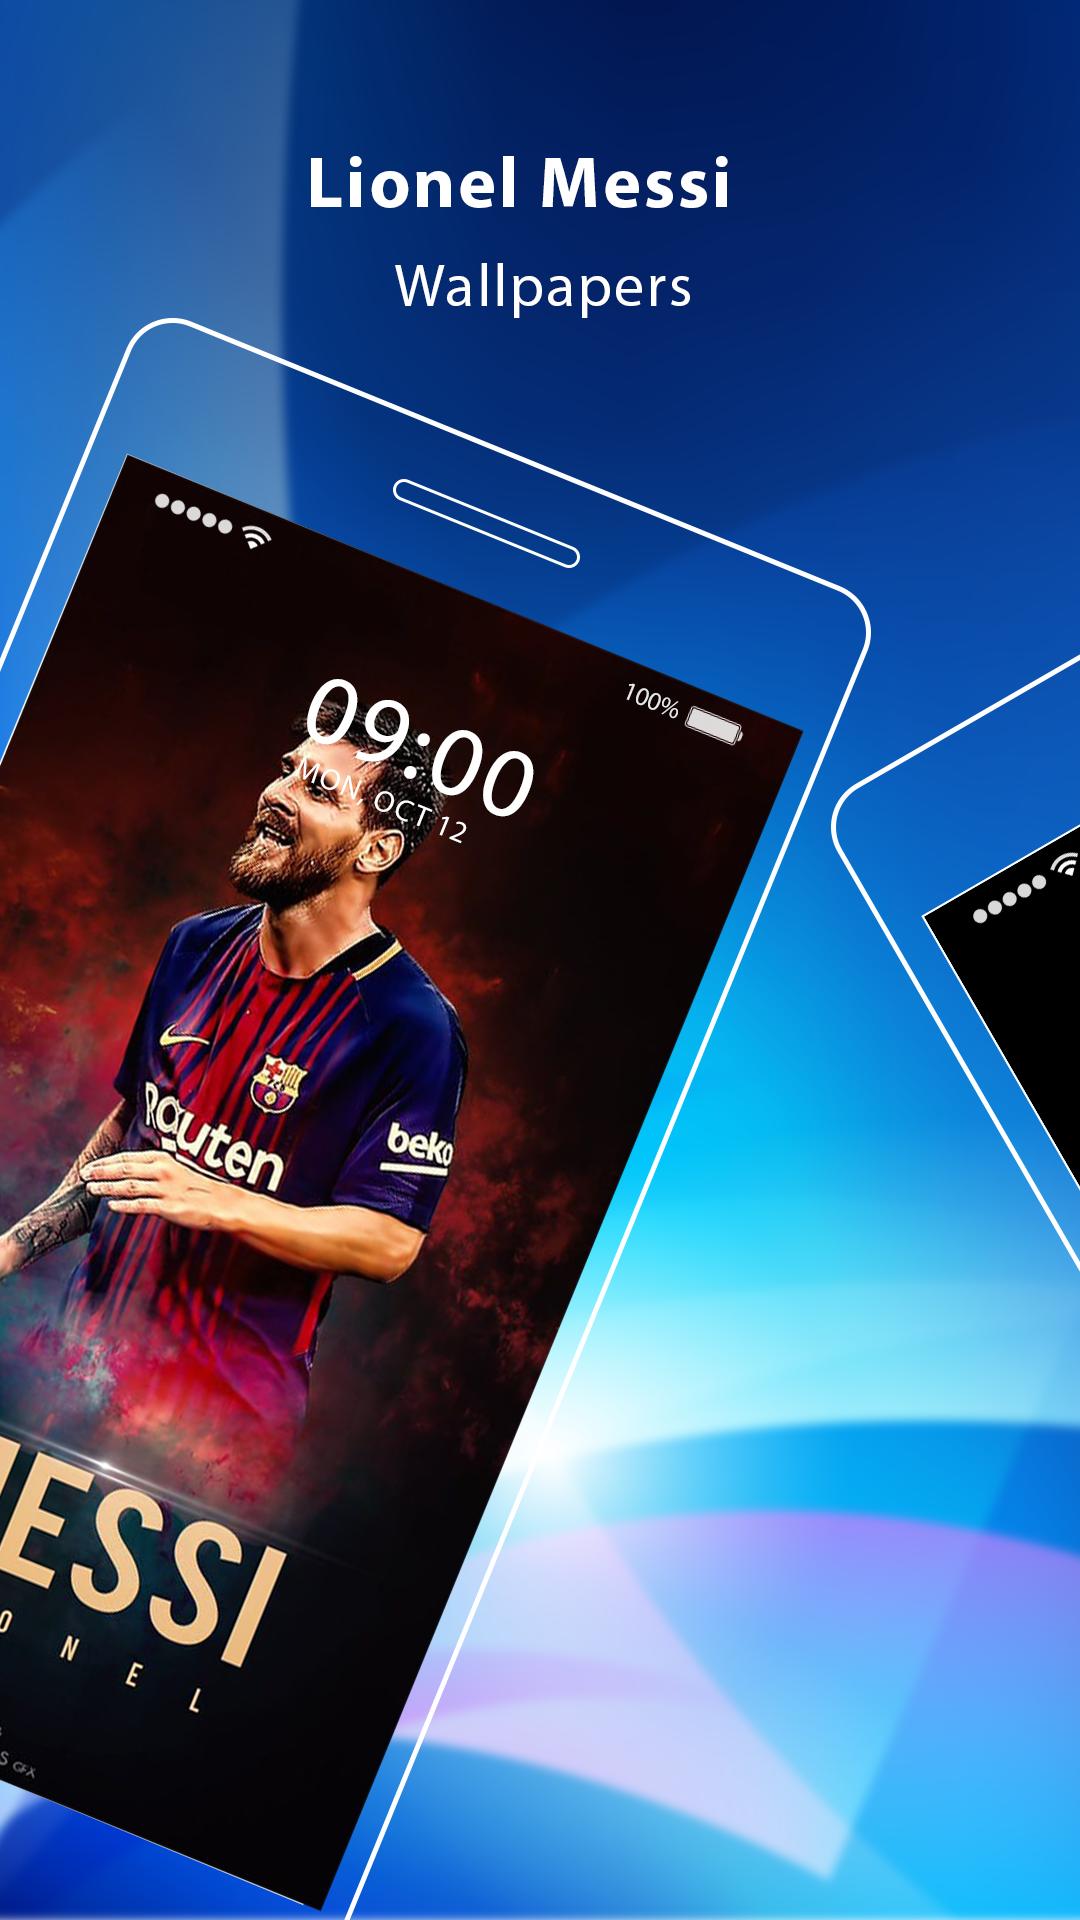 Lionel Messi Wallpaper Hd 4k 2021 Messi G O A T For Android Apk Download